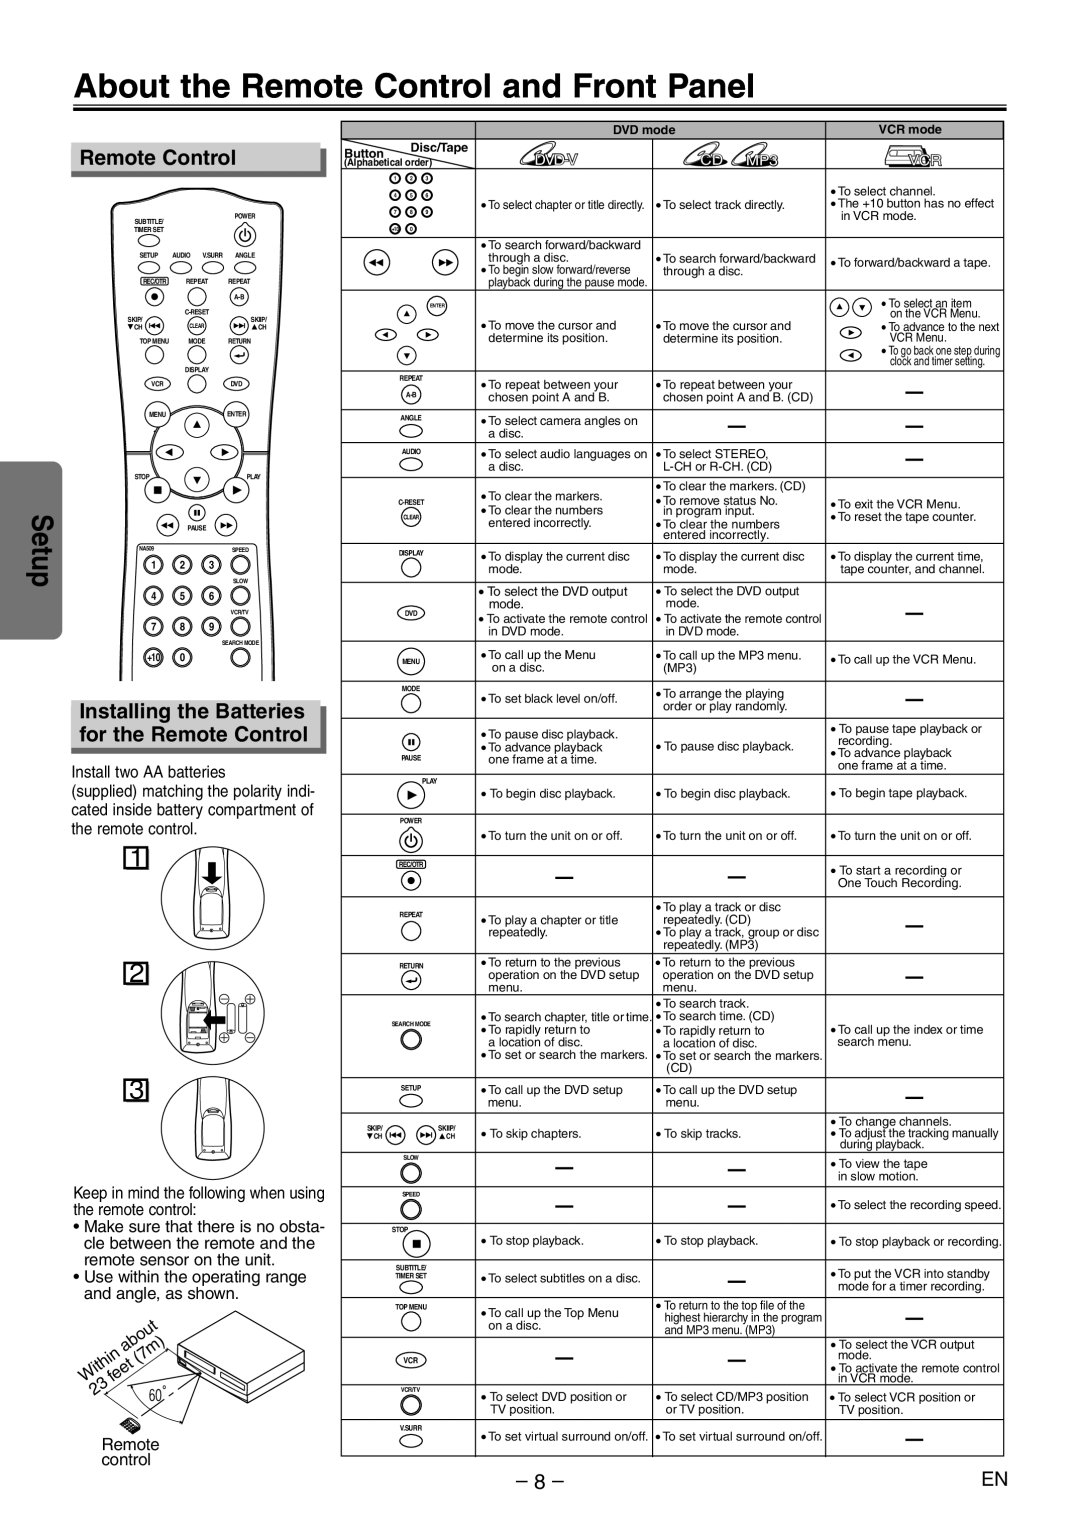 Magnavox MSD804 owner manual About the Remote Control and Front Panel, Installing the Batteries for the Remote Control 